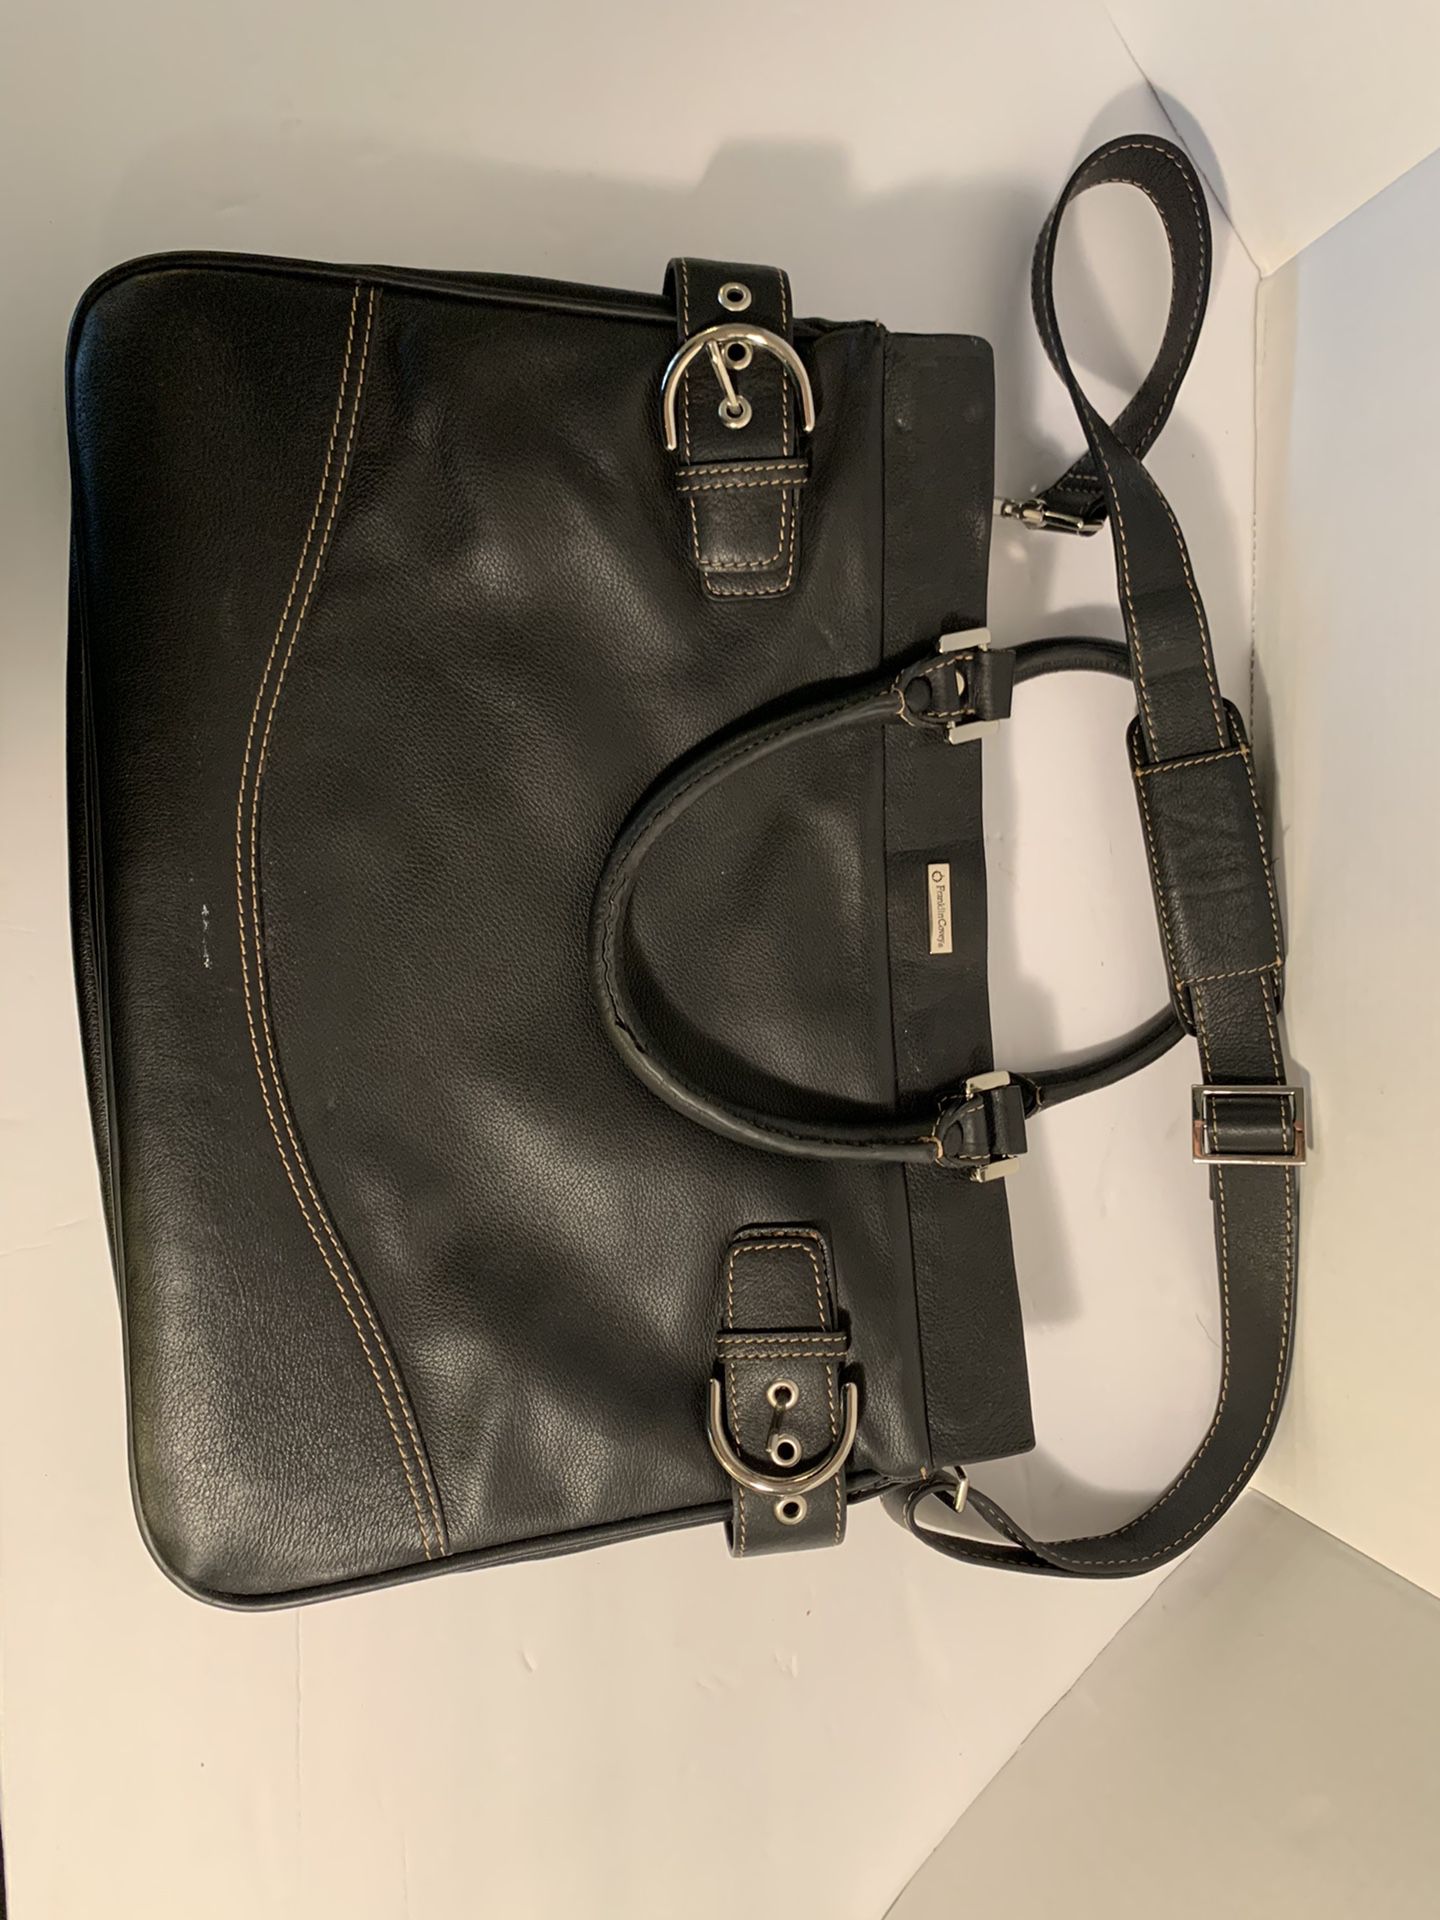 Franklin Covey Tote for Sale in Gresham, OR - OfferUp